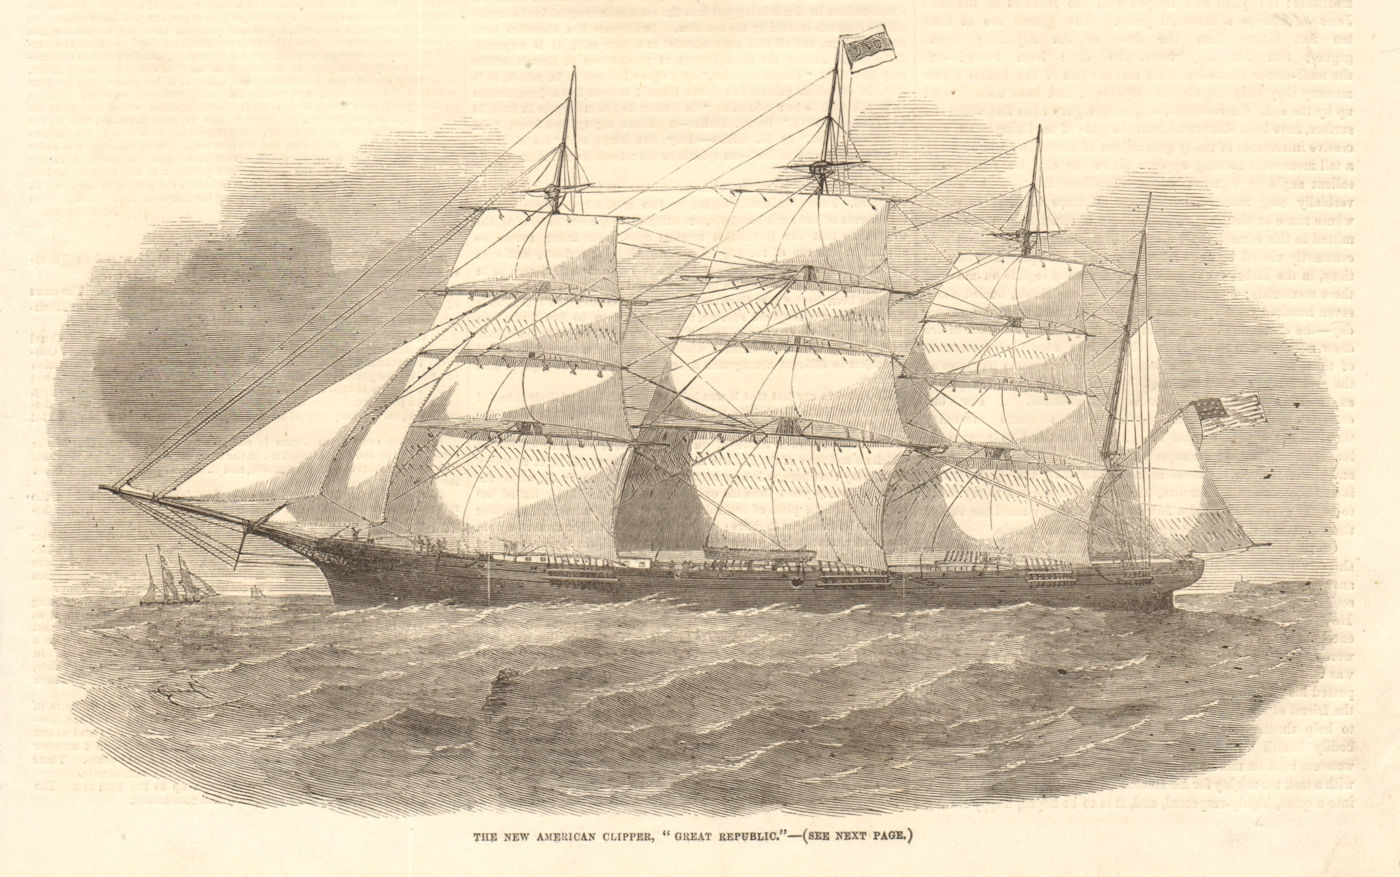 Associate Product The new American clipper "Great Republic". Ships. USA 1855 ILN full page print